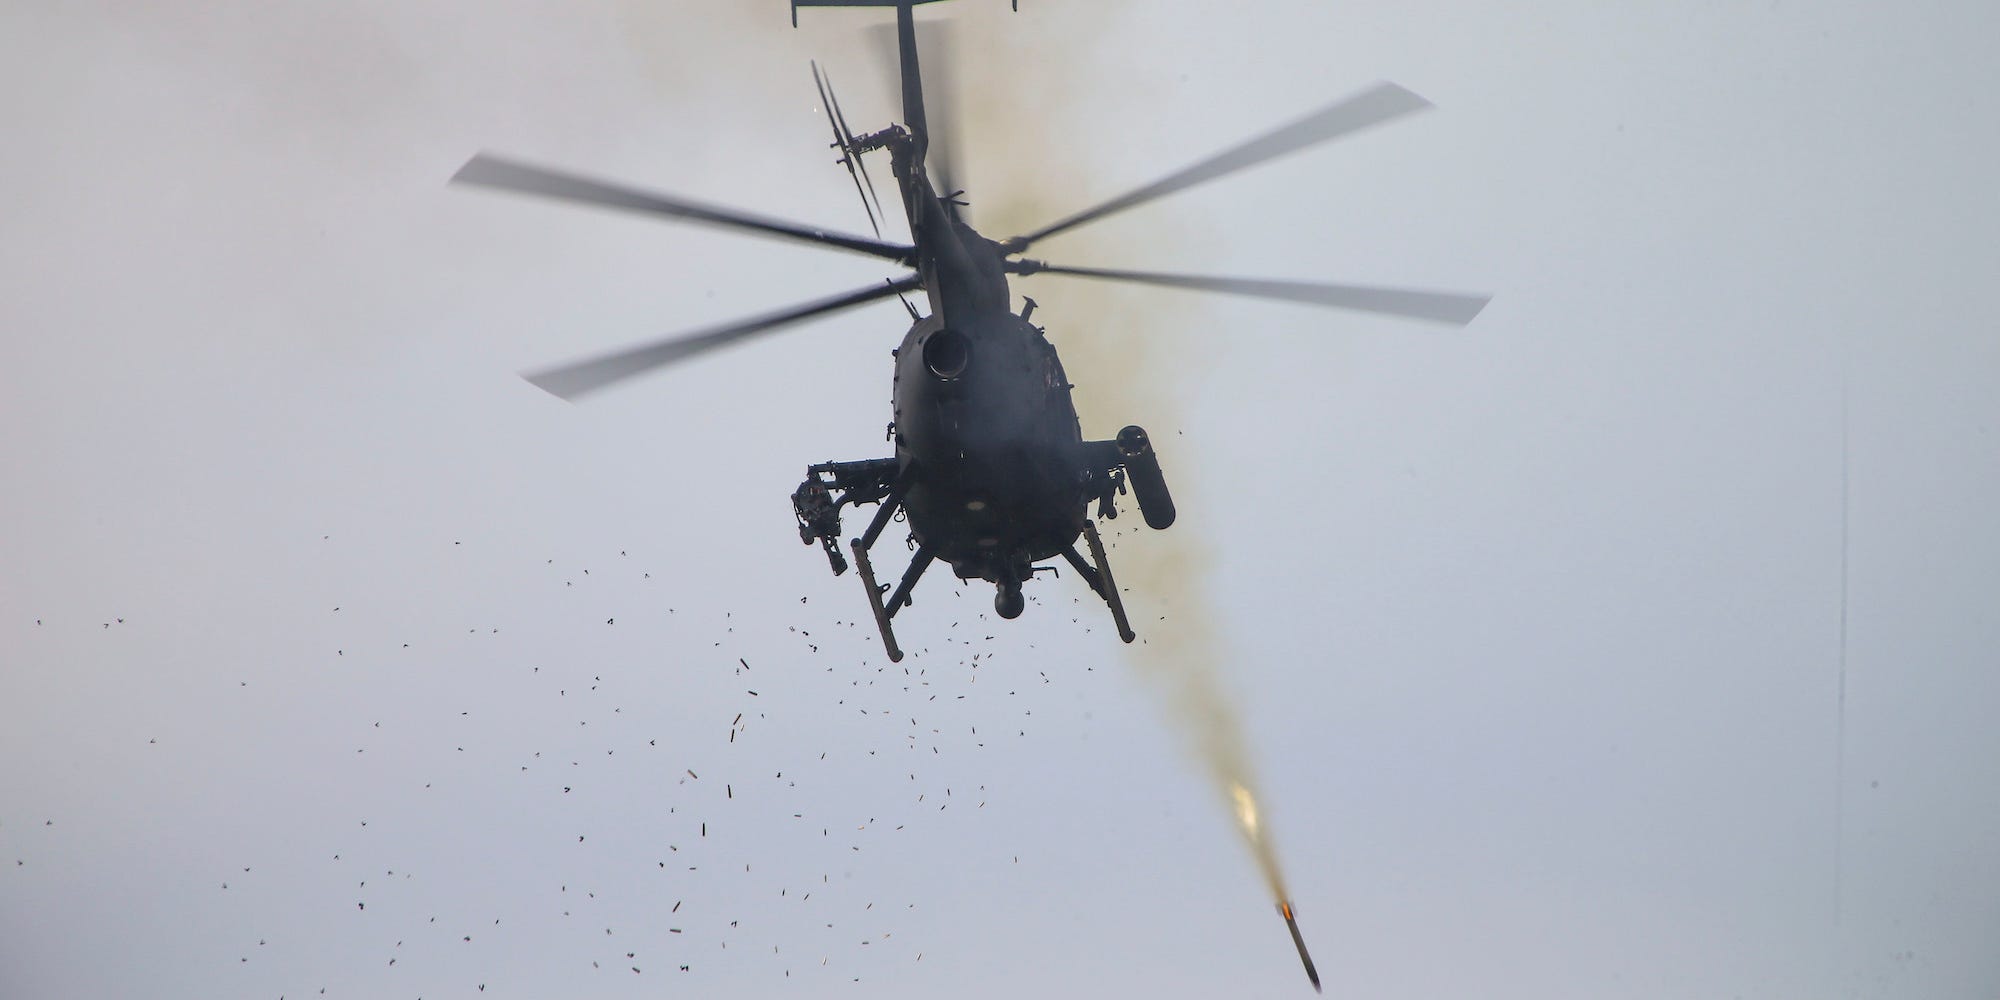 Army AH-6 Little Bird helicopter fires rockets